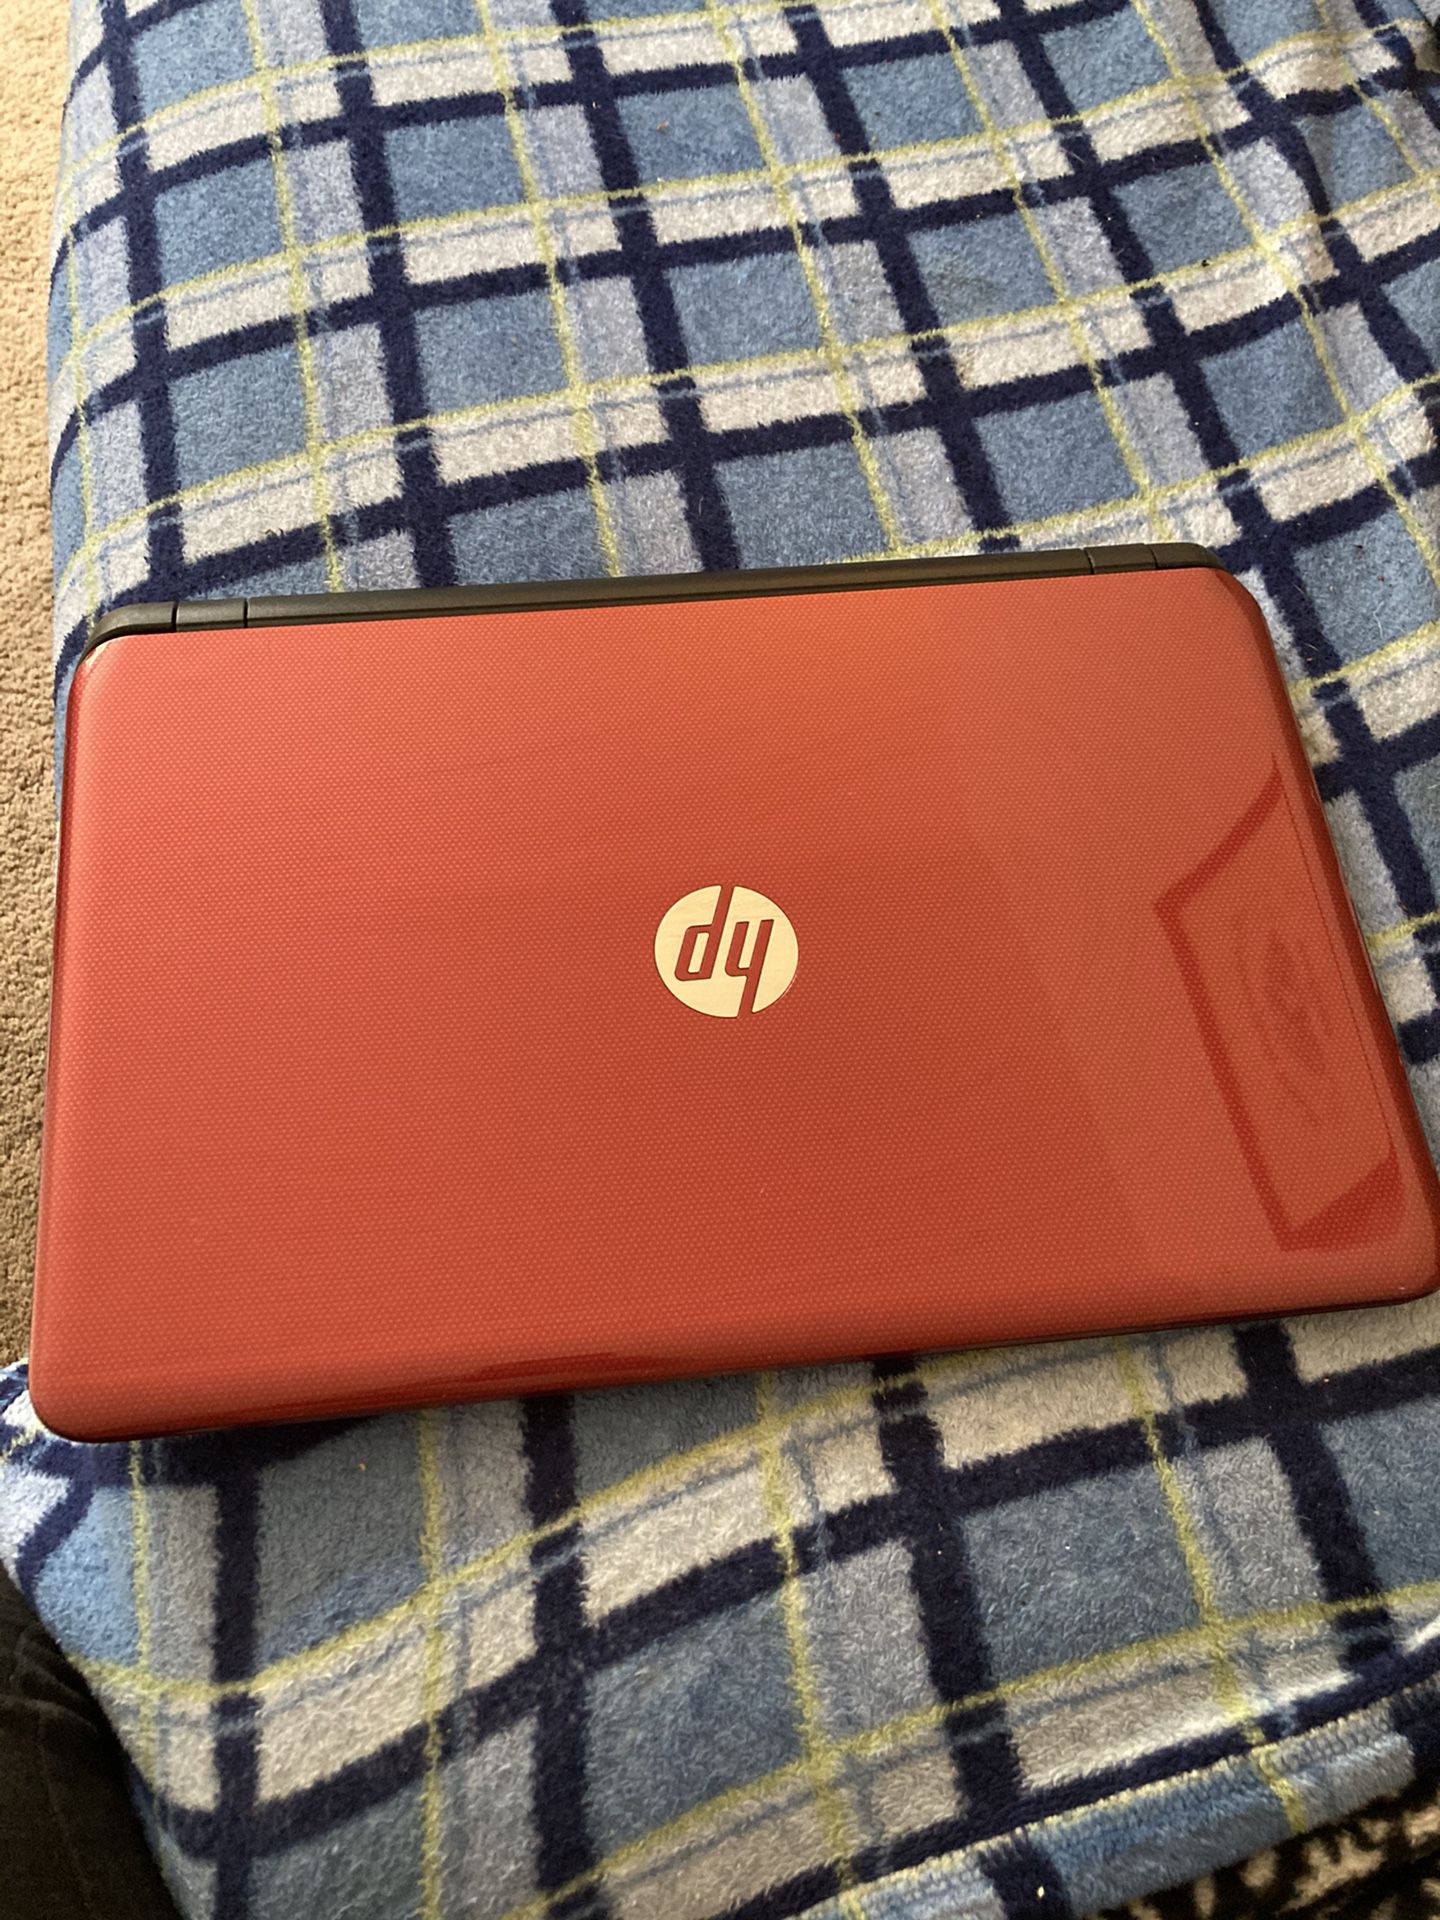 HP Laptop - No Charger